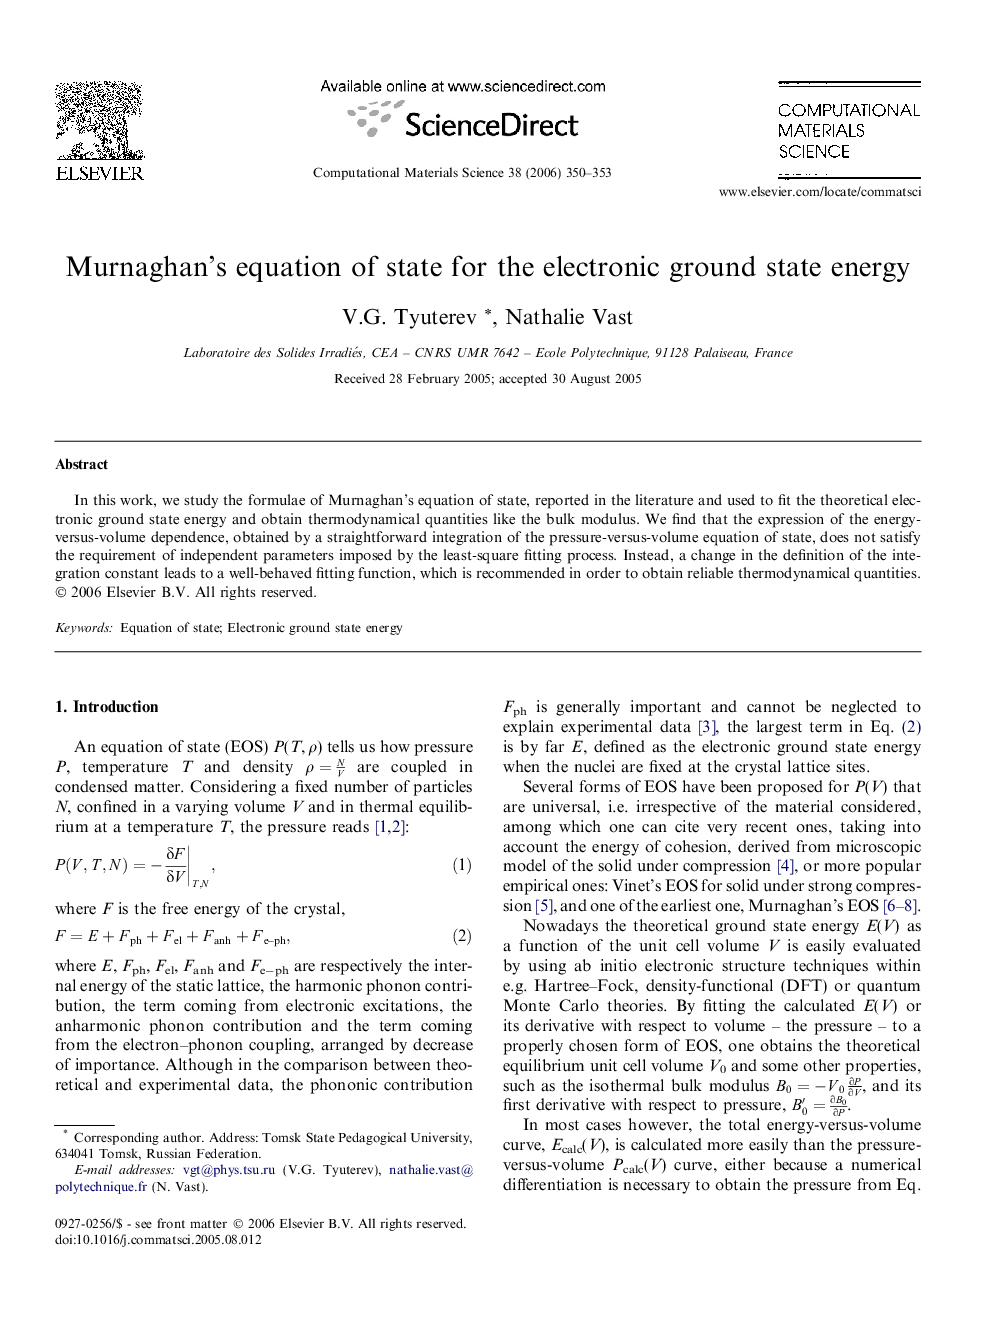 Murnaghan’s equation of state for the electronic ground state energy